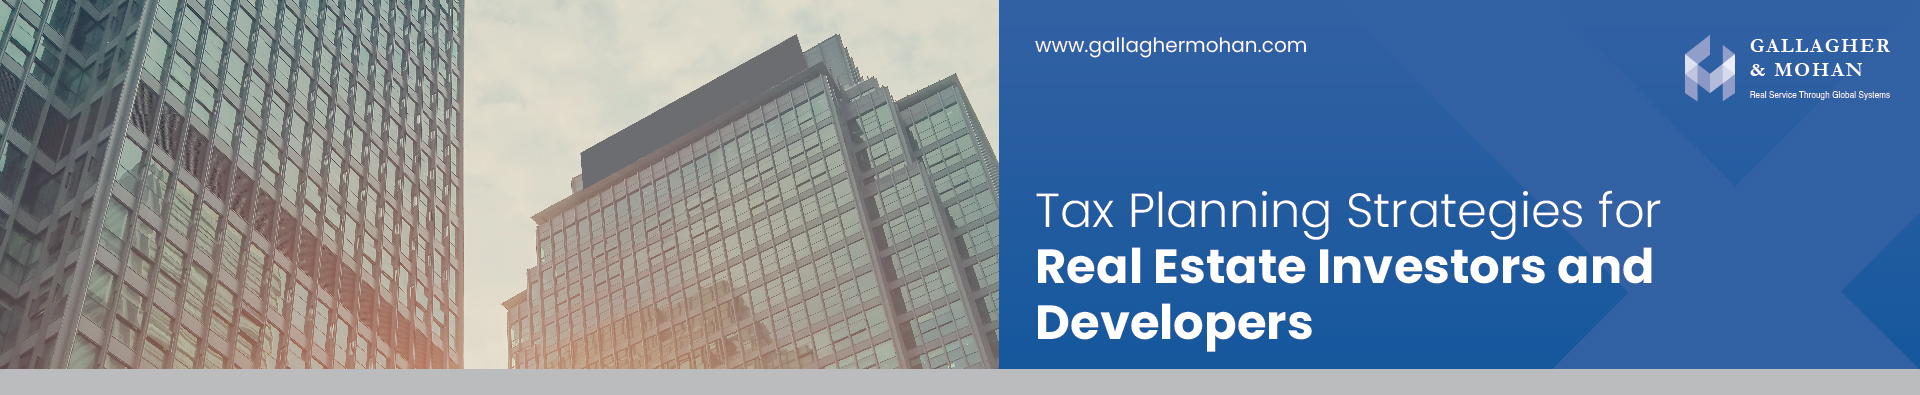 Tax Planning Strategies For Real Estate Investors And Developers